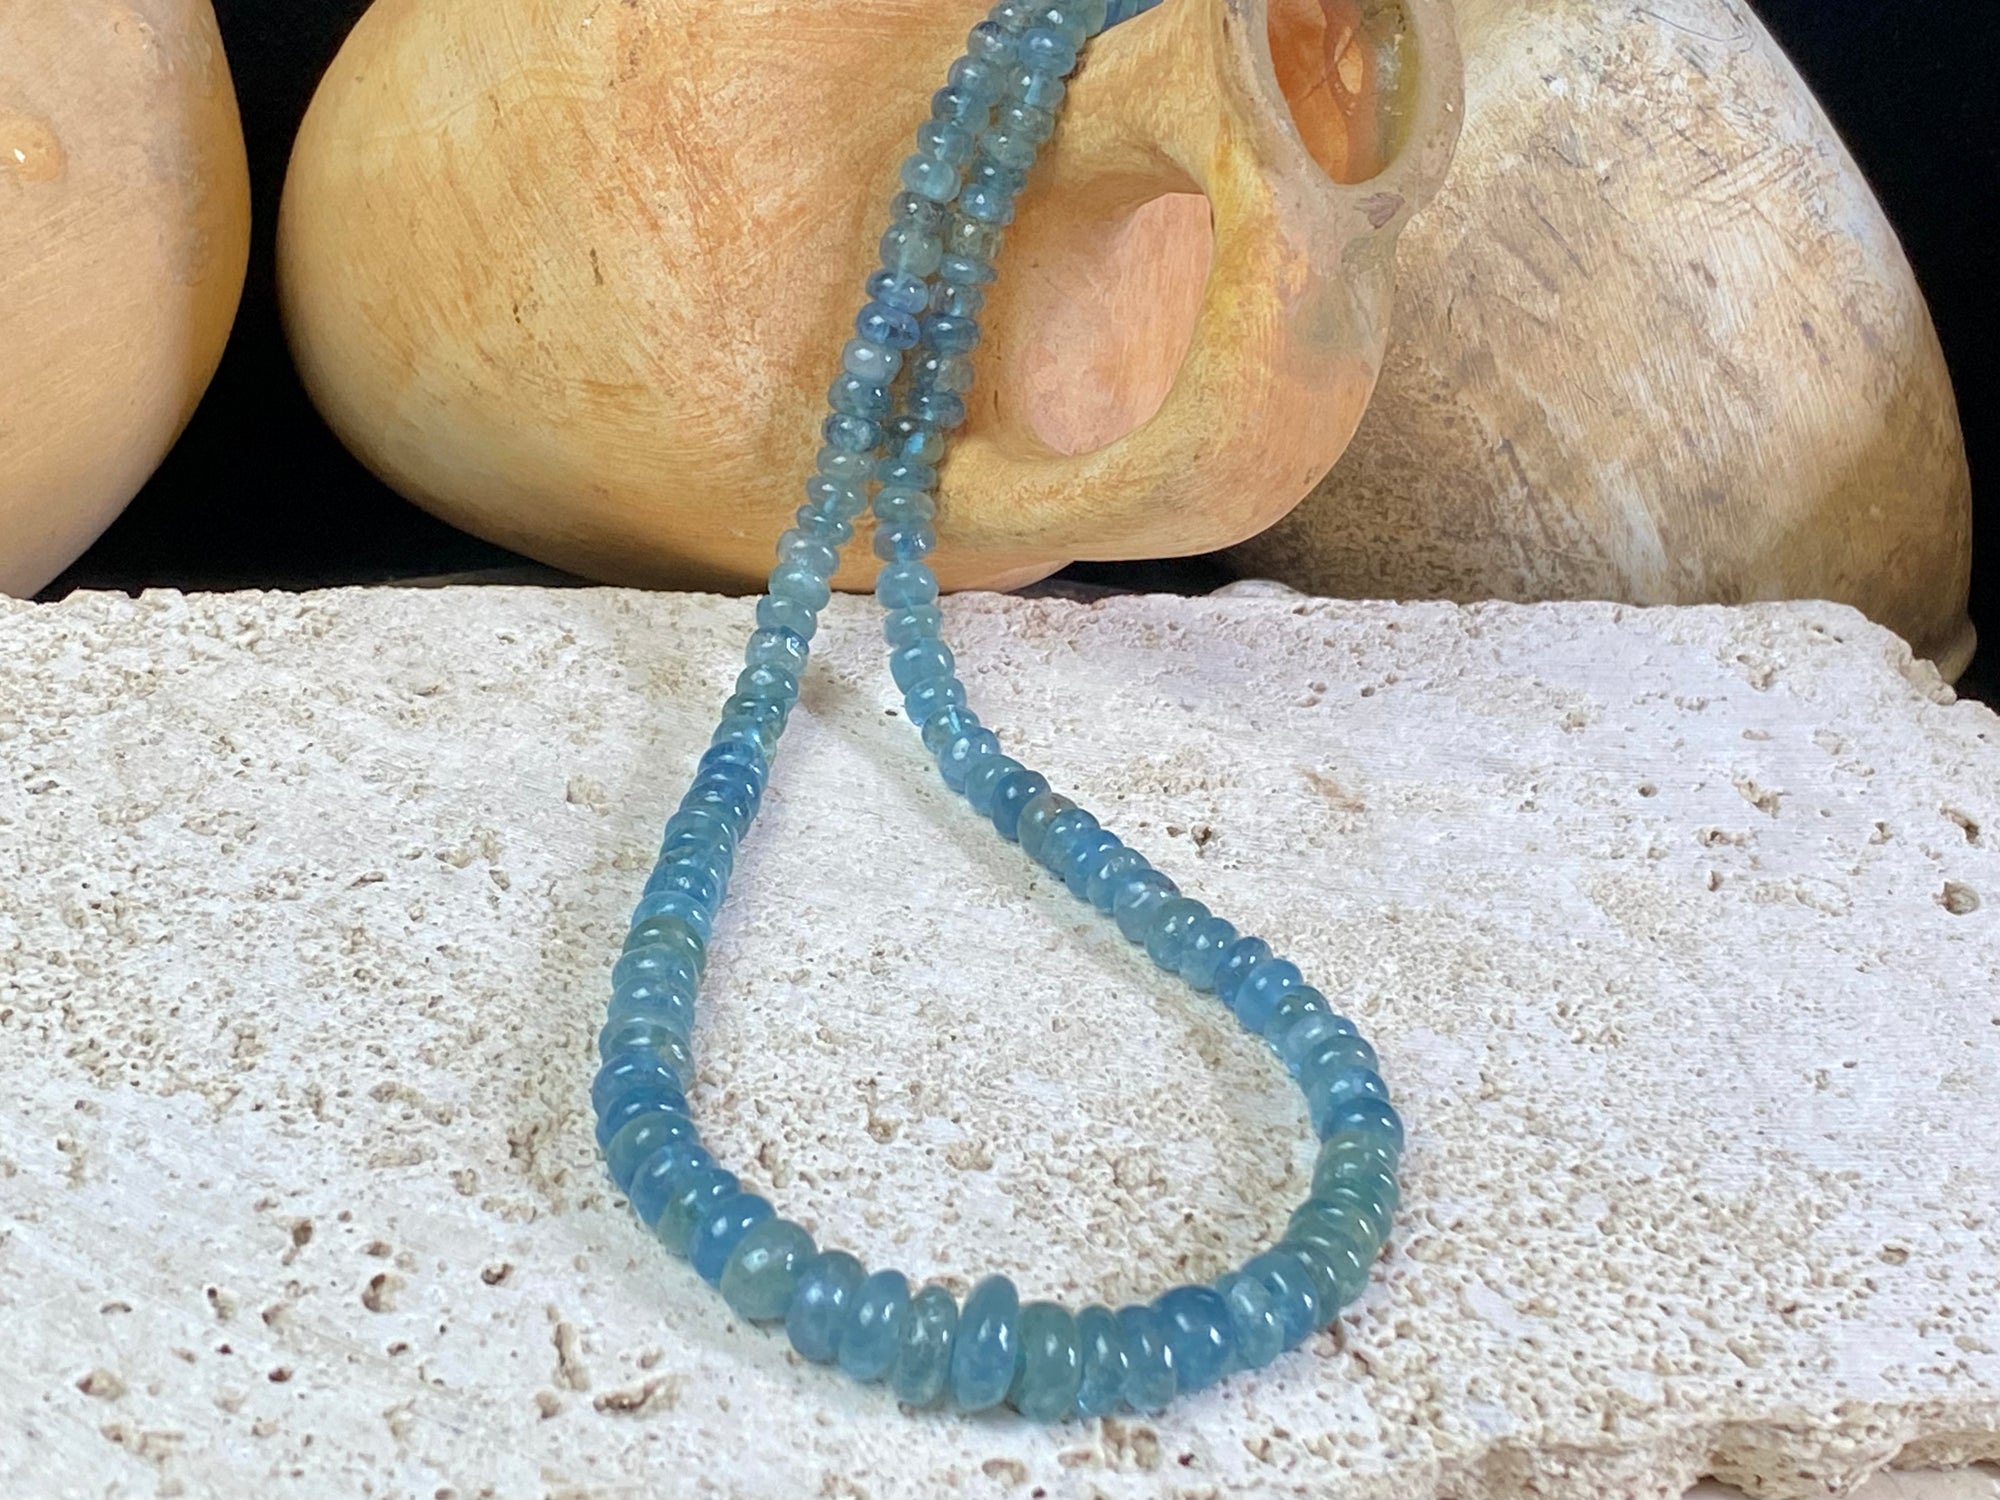 Natural aquamarine necklace featuring rondel cut graduated aquamarine. Sterling silver hook and ring clasp. The aquamarine beads are matched, graduated, 100% natural, of a deep cloudy sea blue. Measurements: 41.5 cm